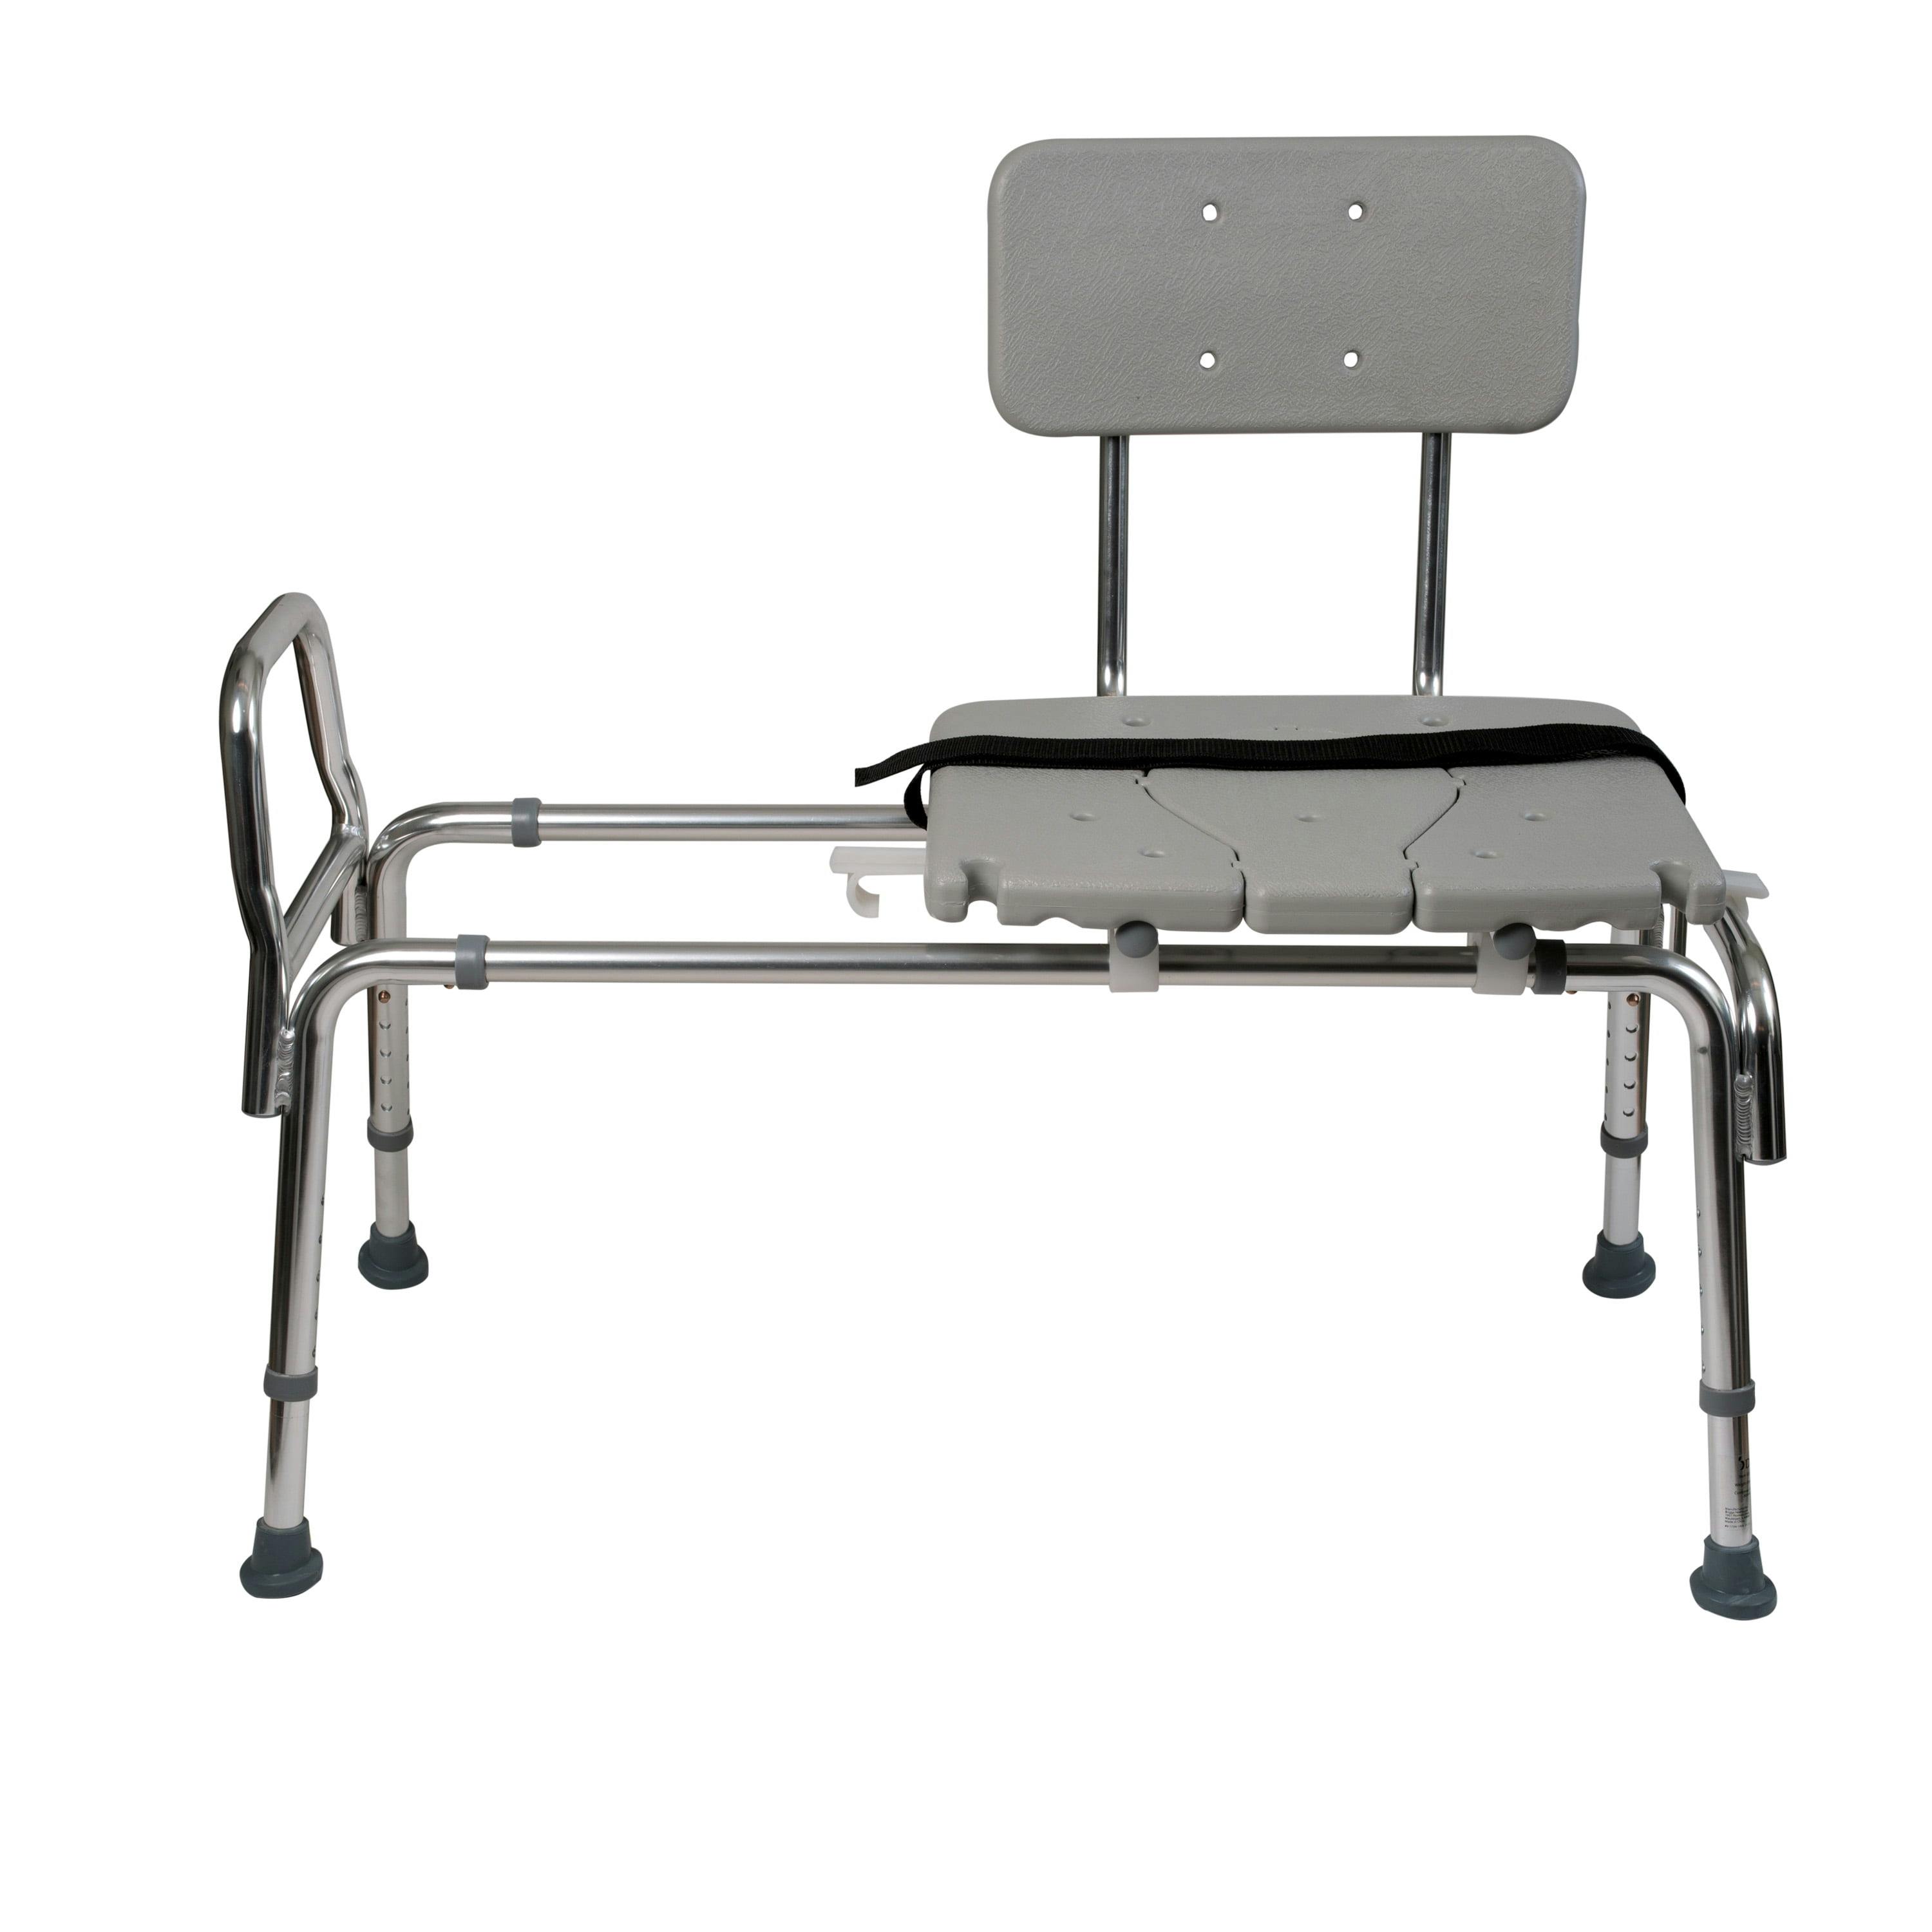 Adjustable Height Gray Plastic Transfer Bench with Nylon Strap